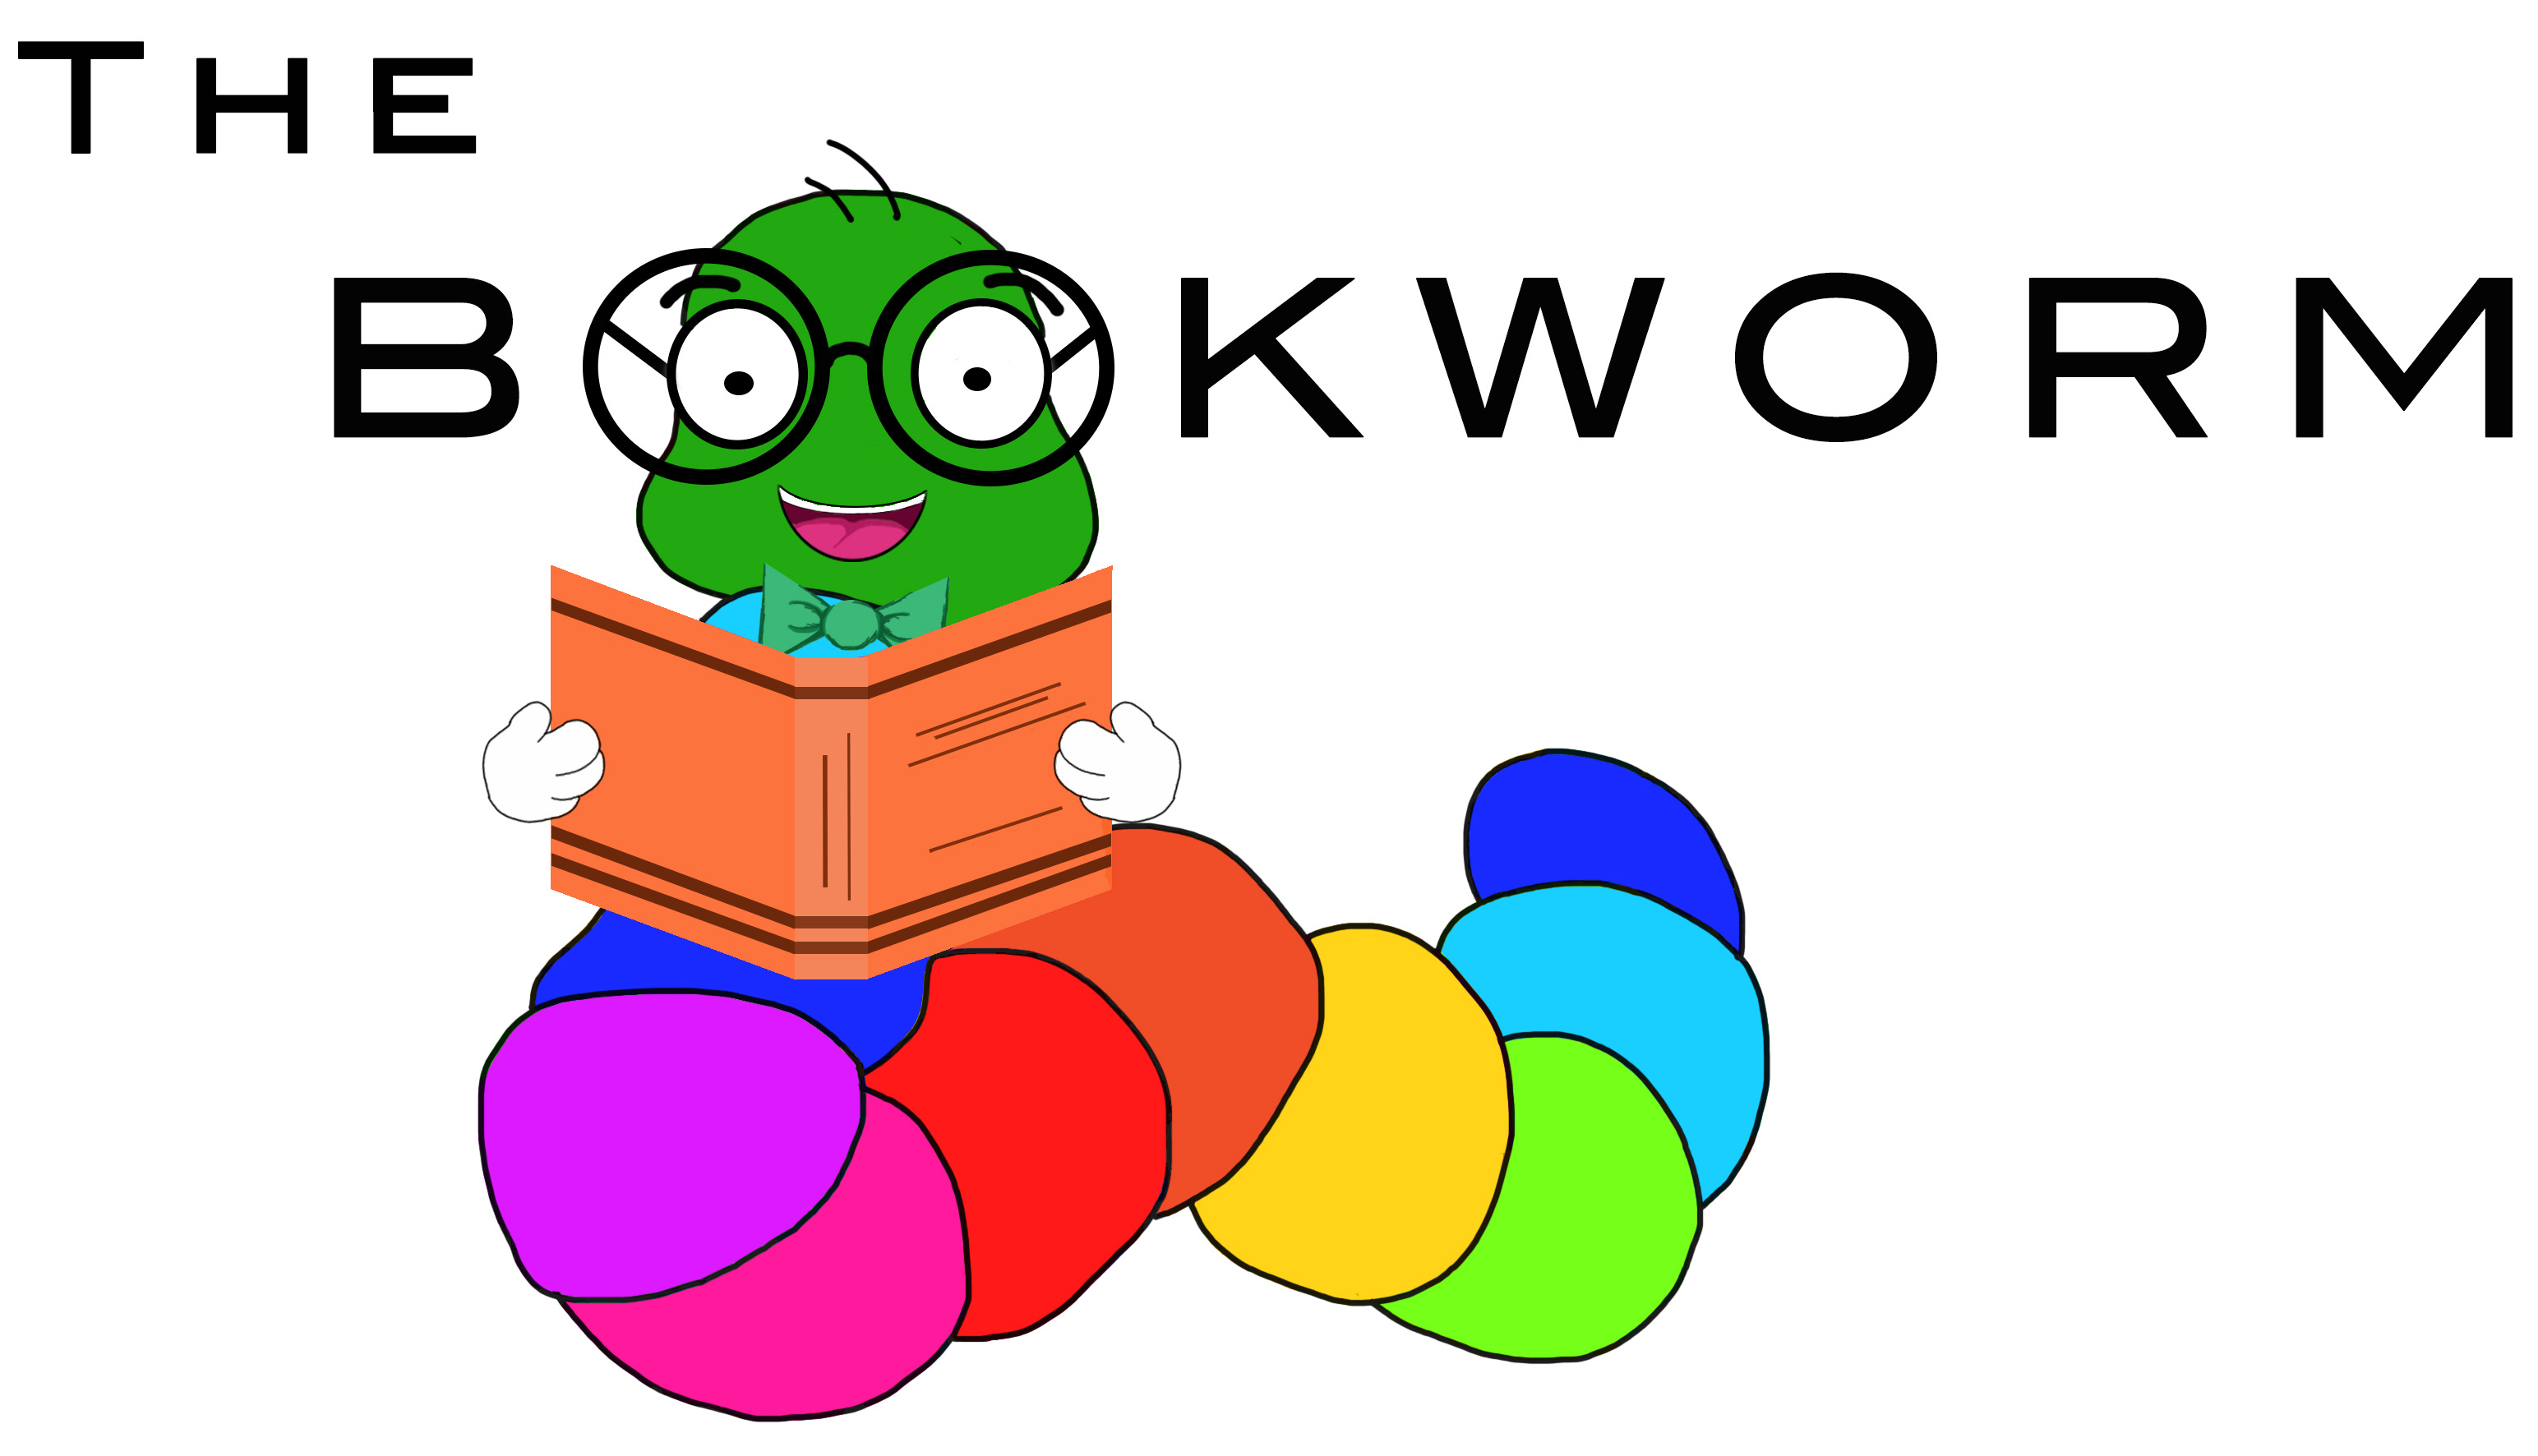 book worm clipart - photo #31